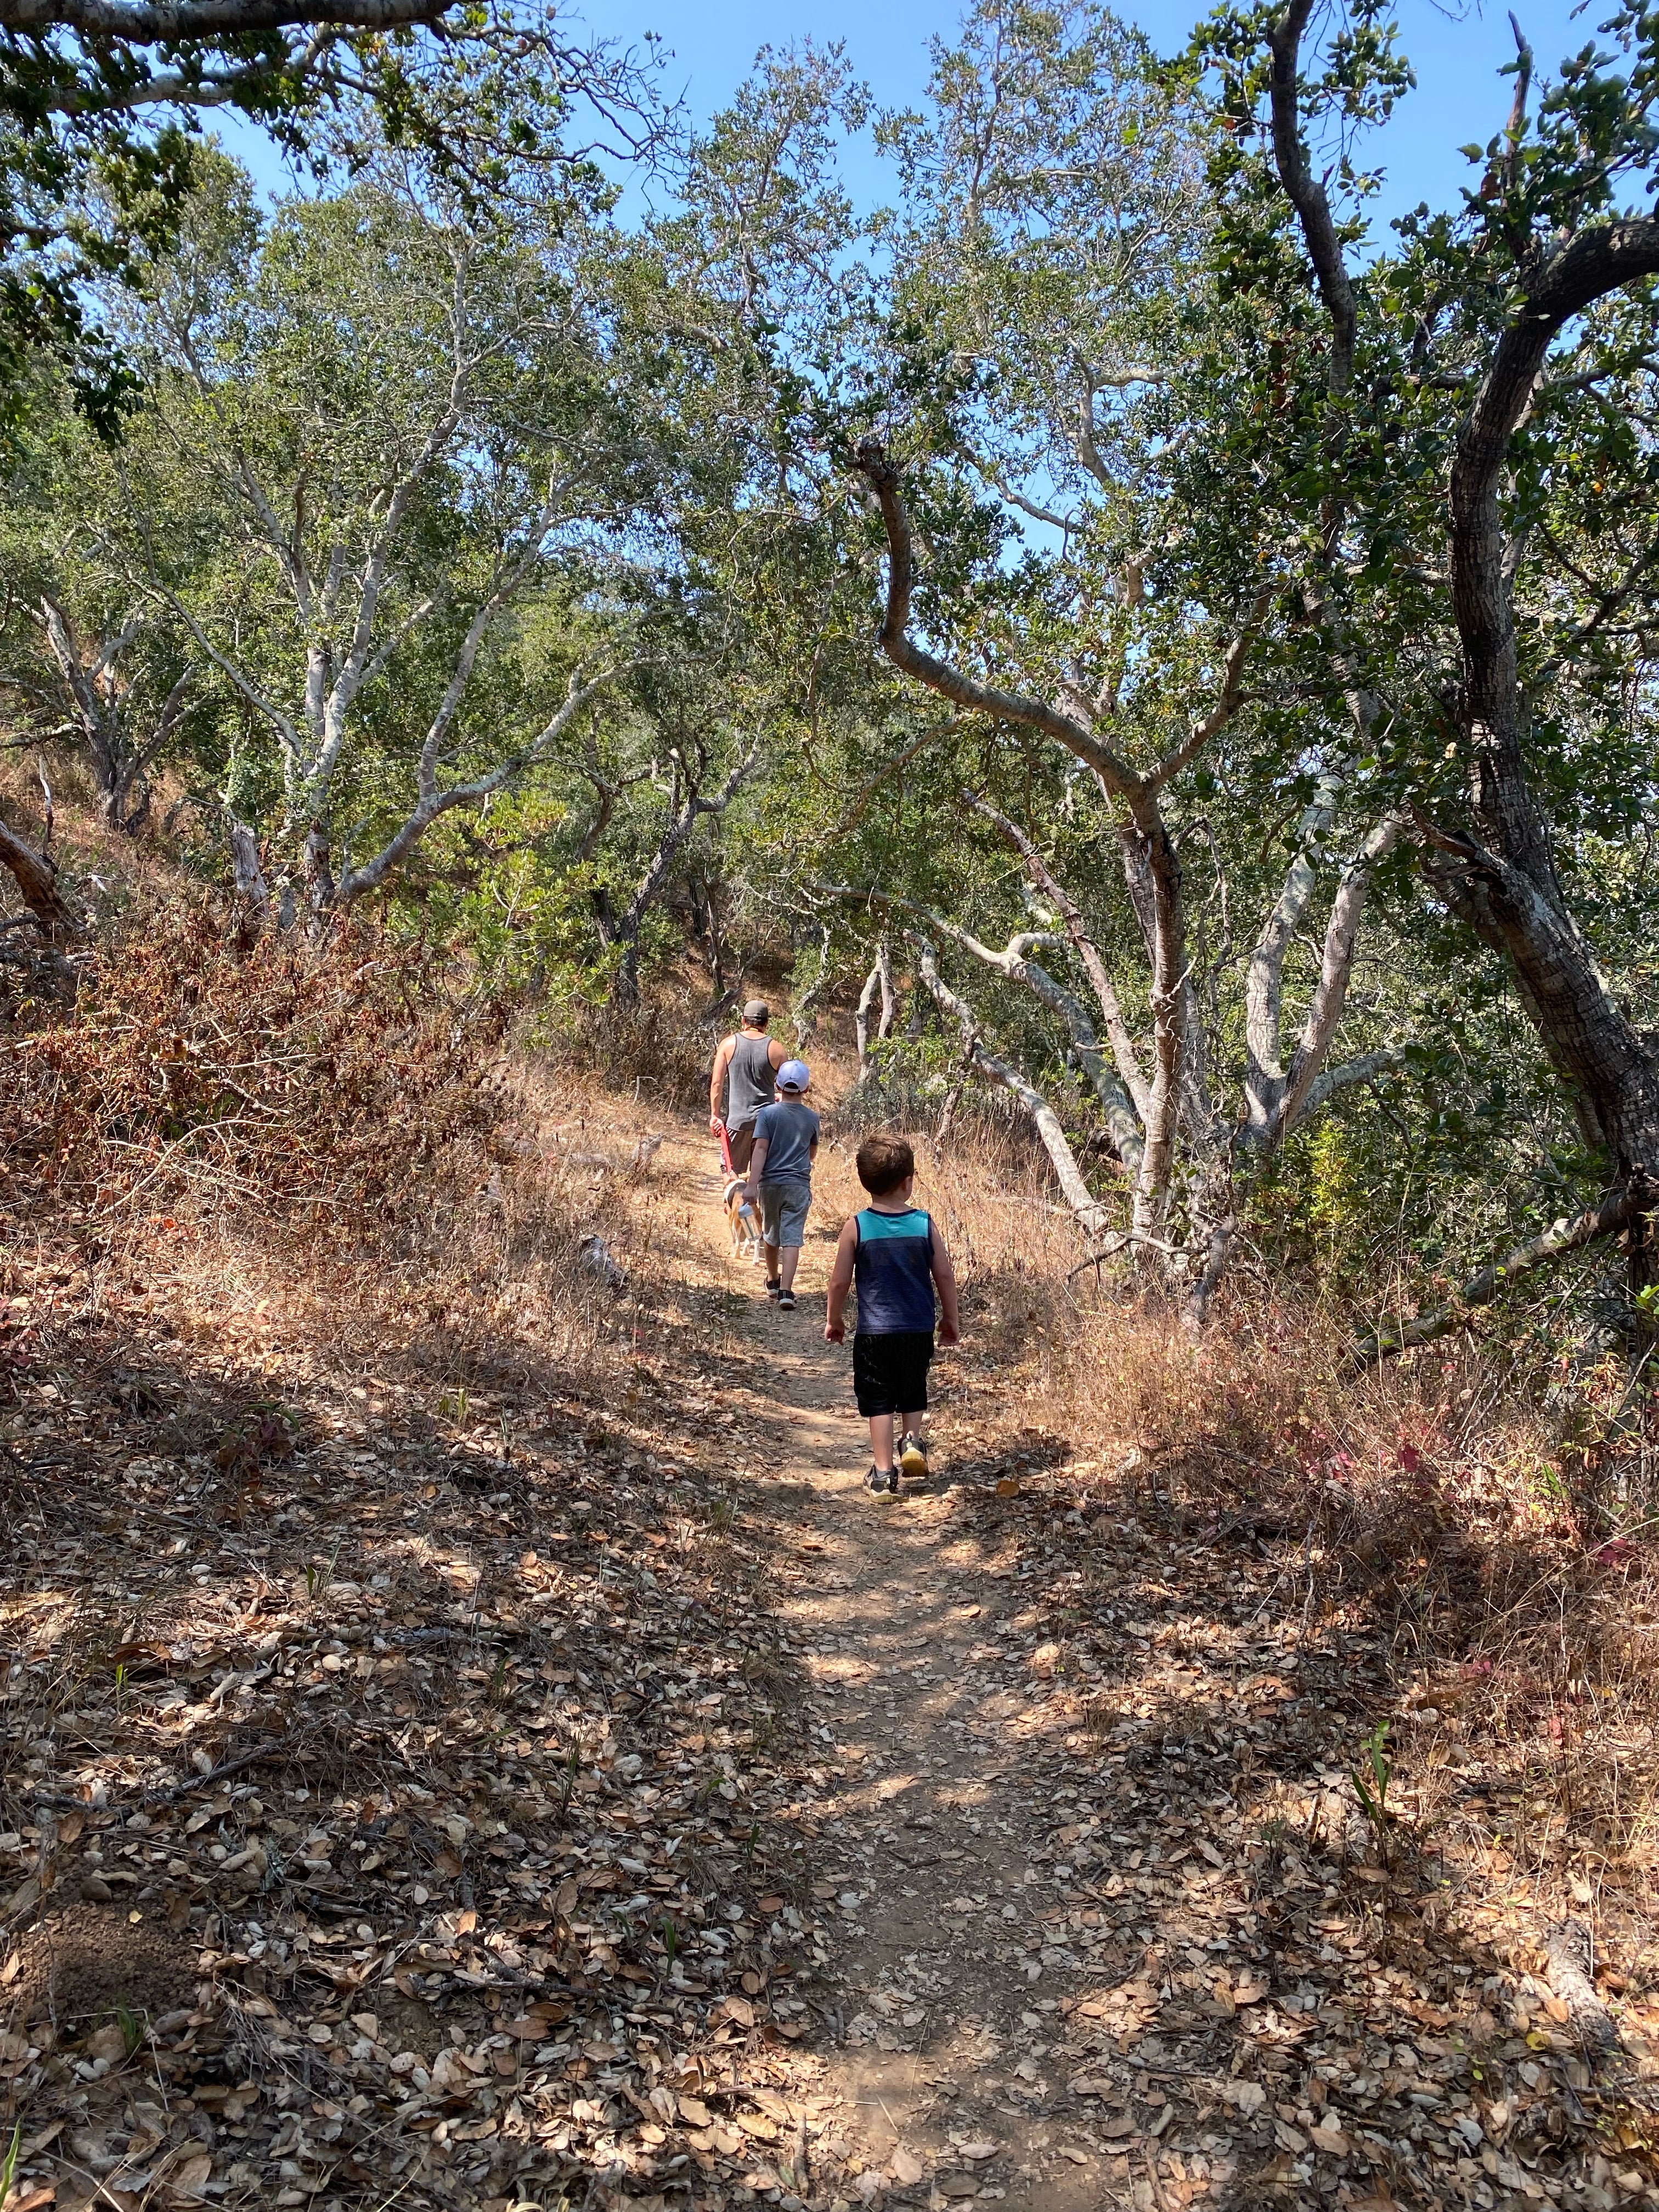 Camper submitted image from El Chorro Regional Park - 4